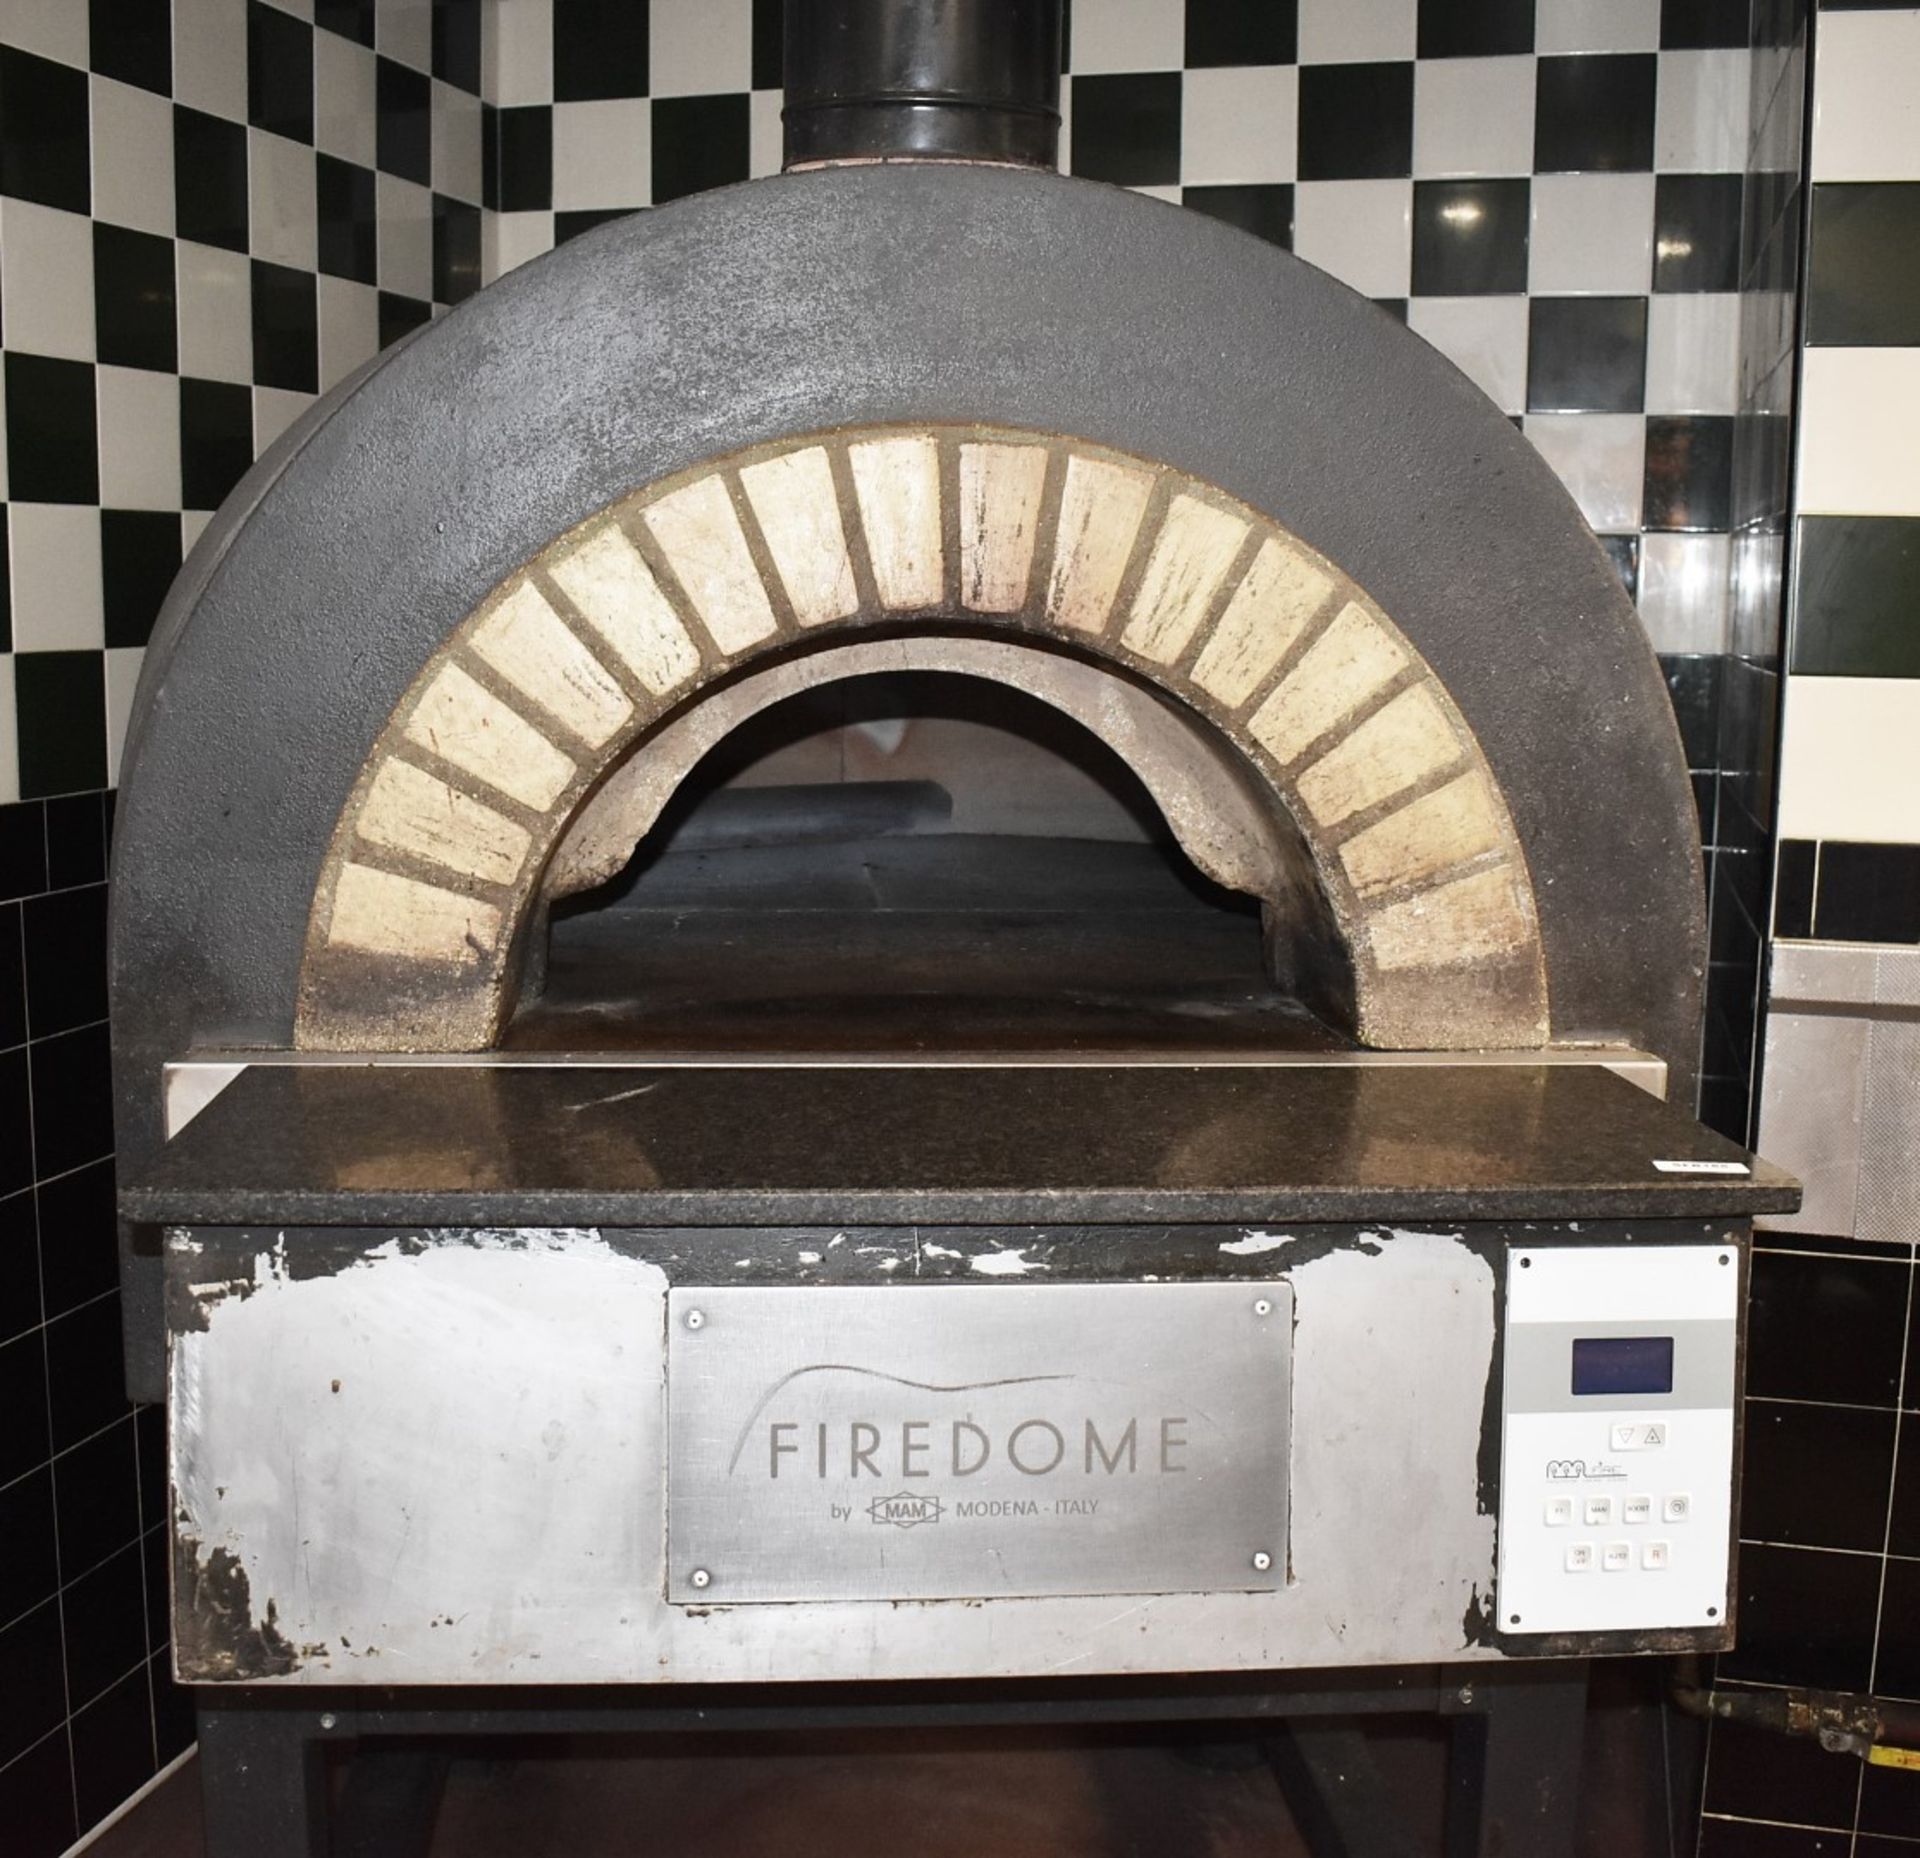 1 x MAM Firedome Commercial Stone Baked Gas Pizza Oven - Made in Italy - Image 7 of 16